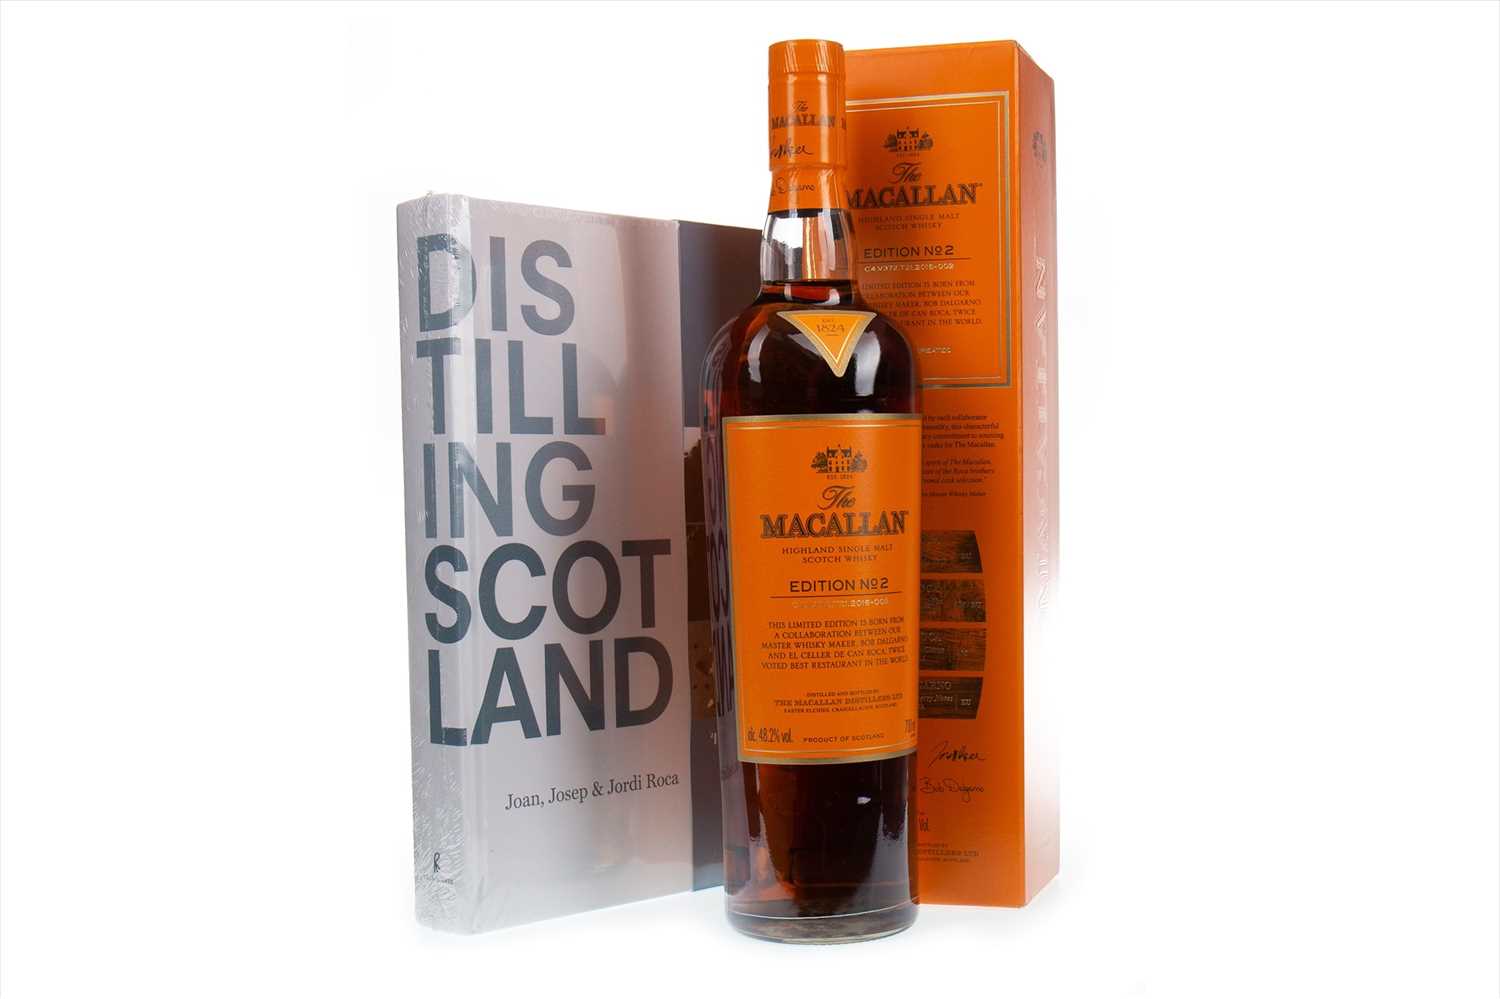 Lot 25 - MACALLAN EDITION NO. 2 WITH TOTE BAG AND BOOK